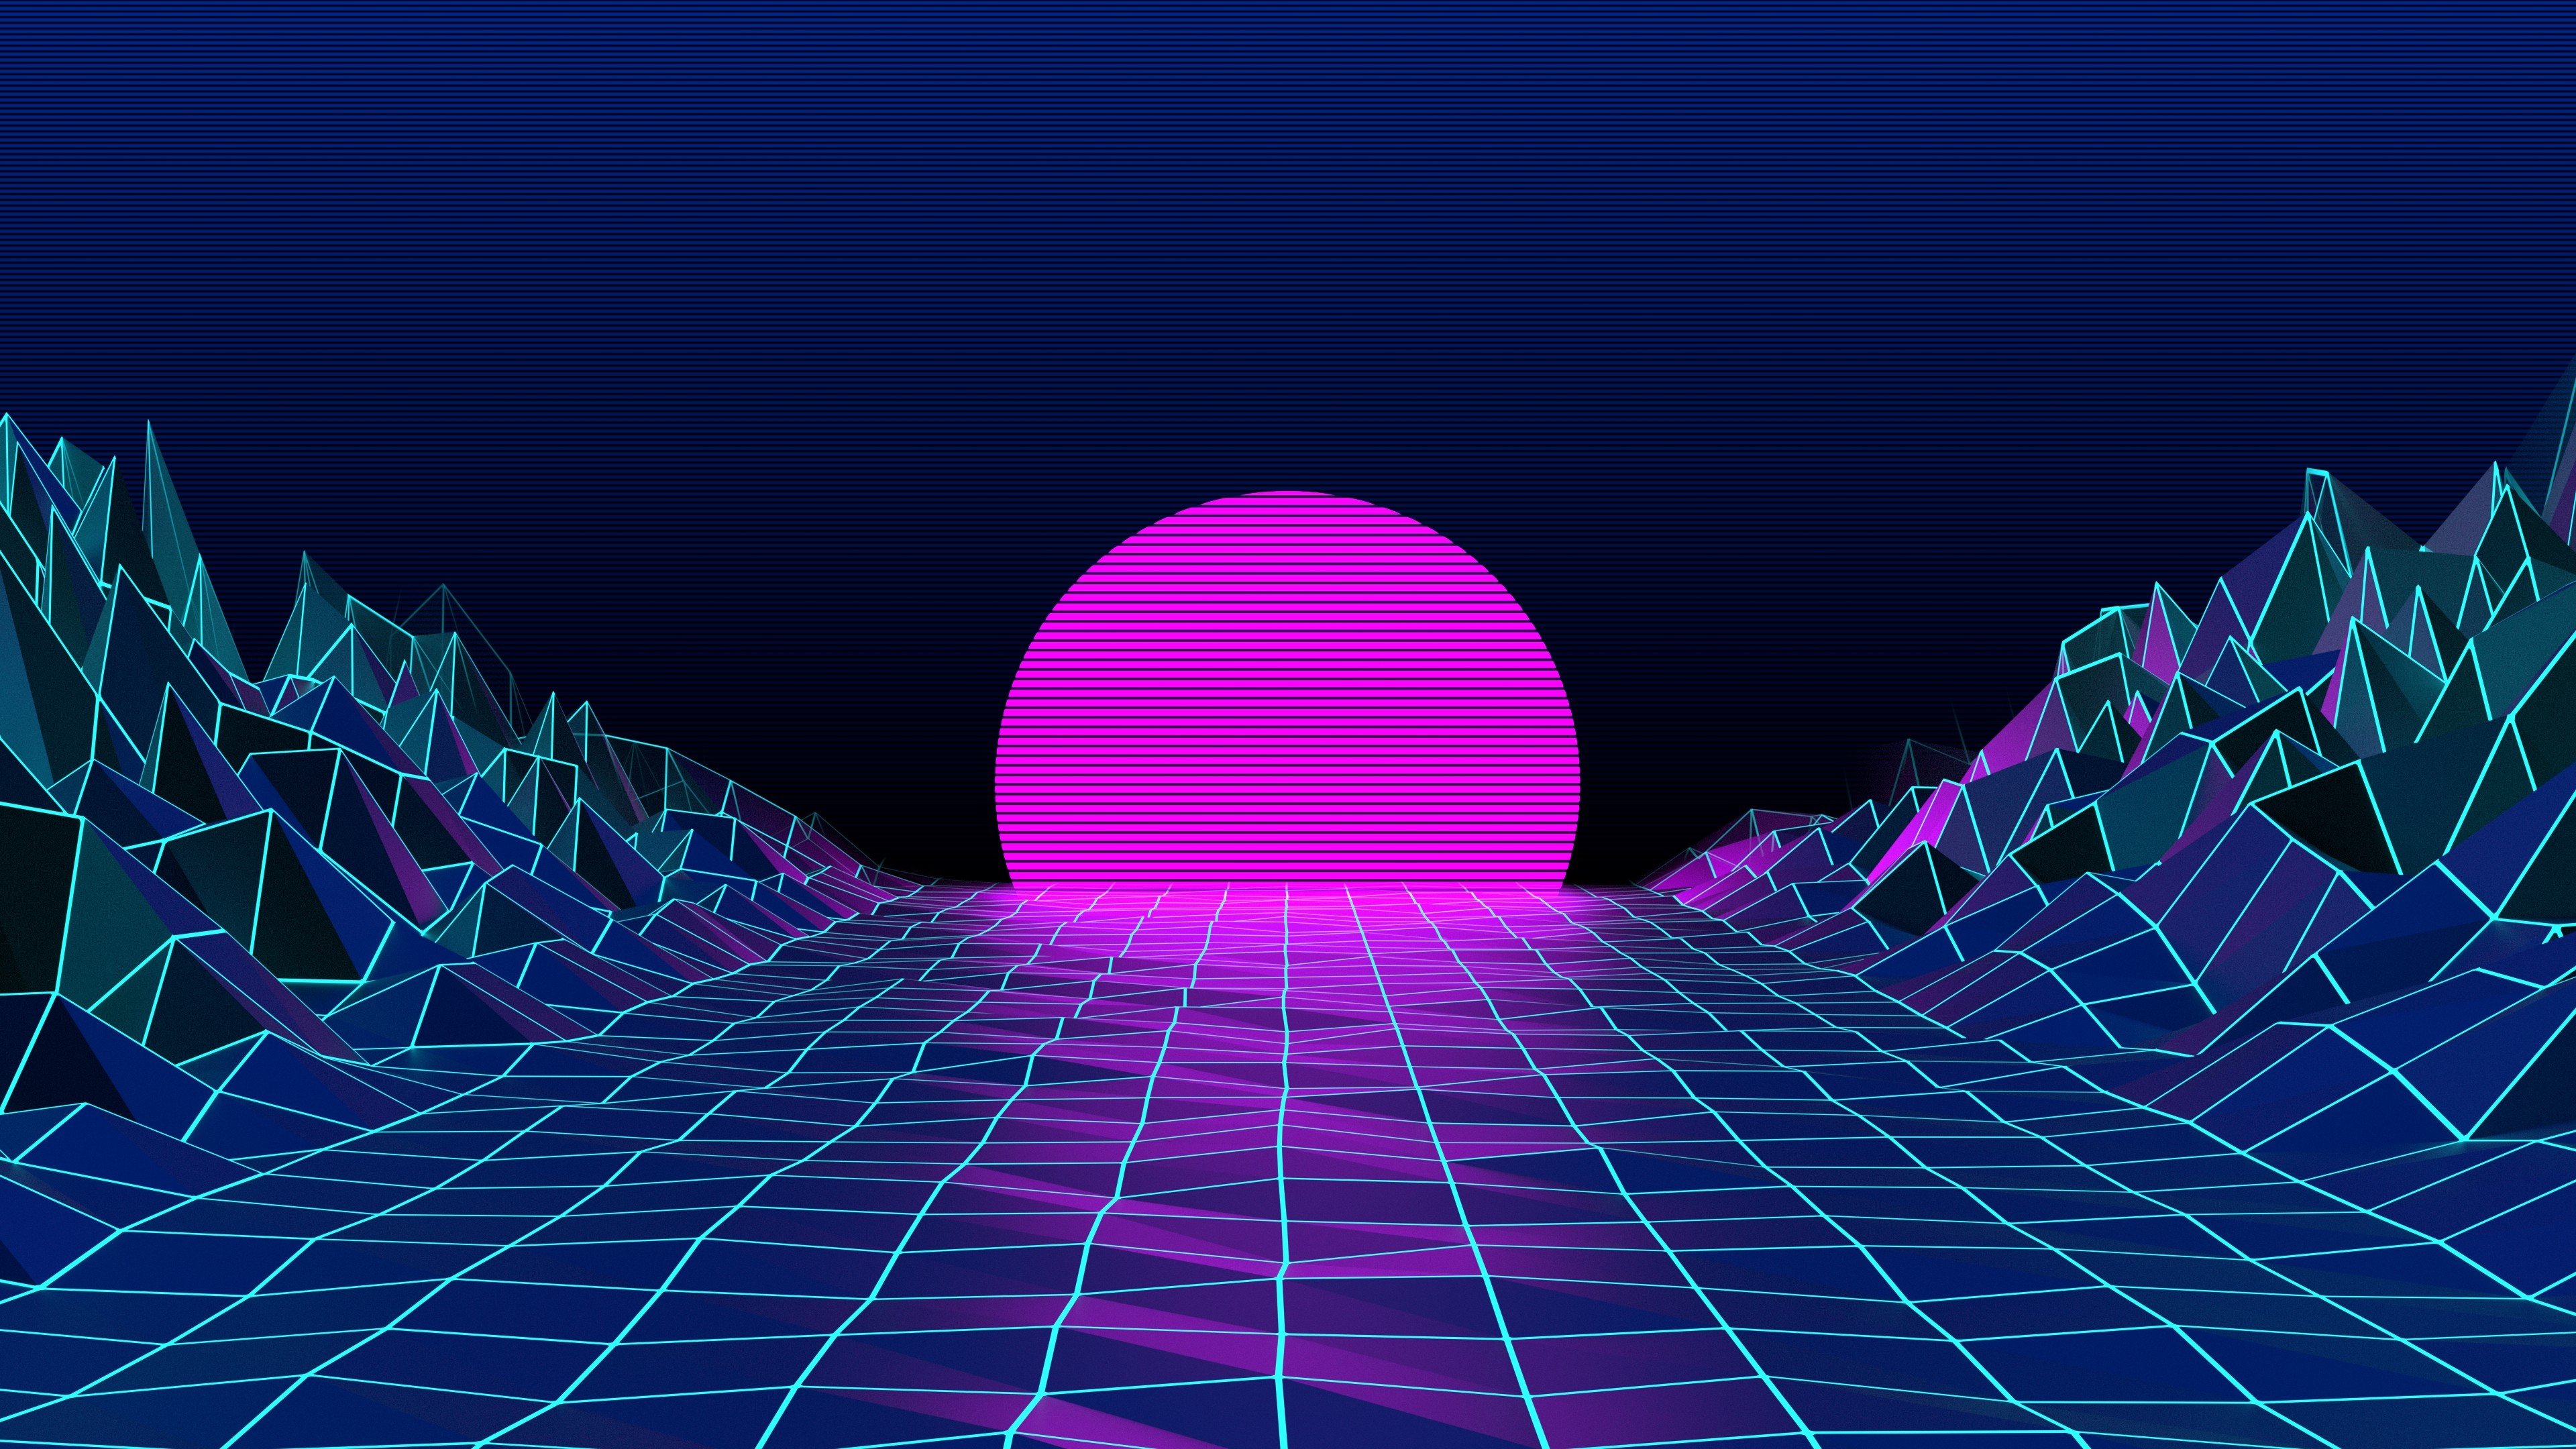 Retro style, 1980s, Abstract, Synthwave Wallpaper